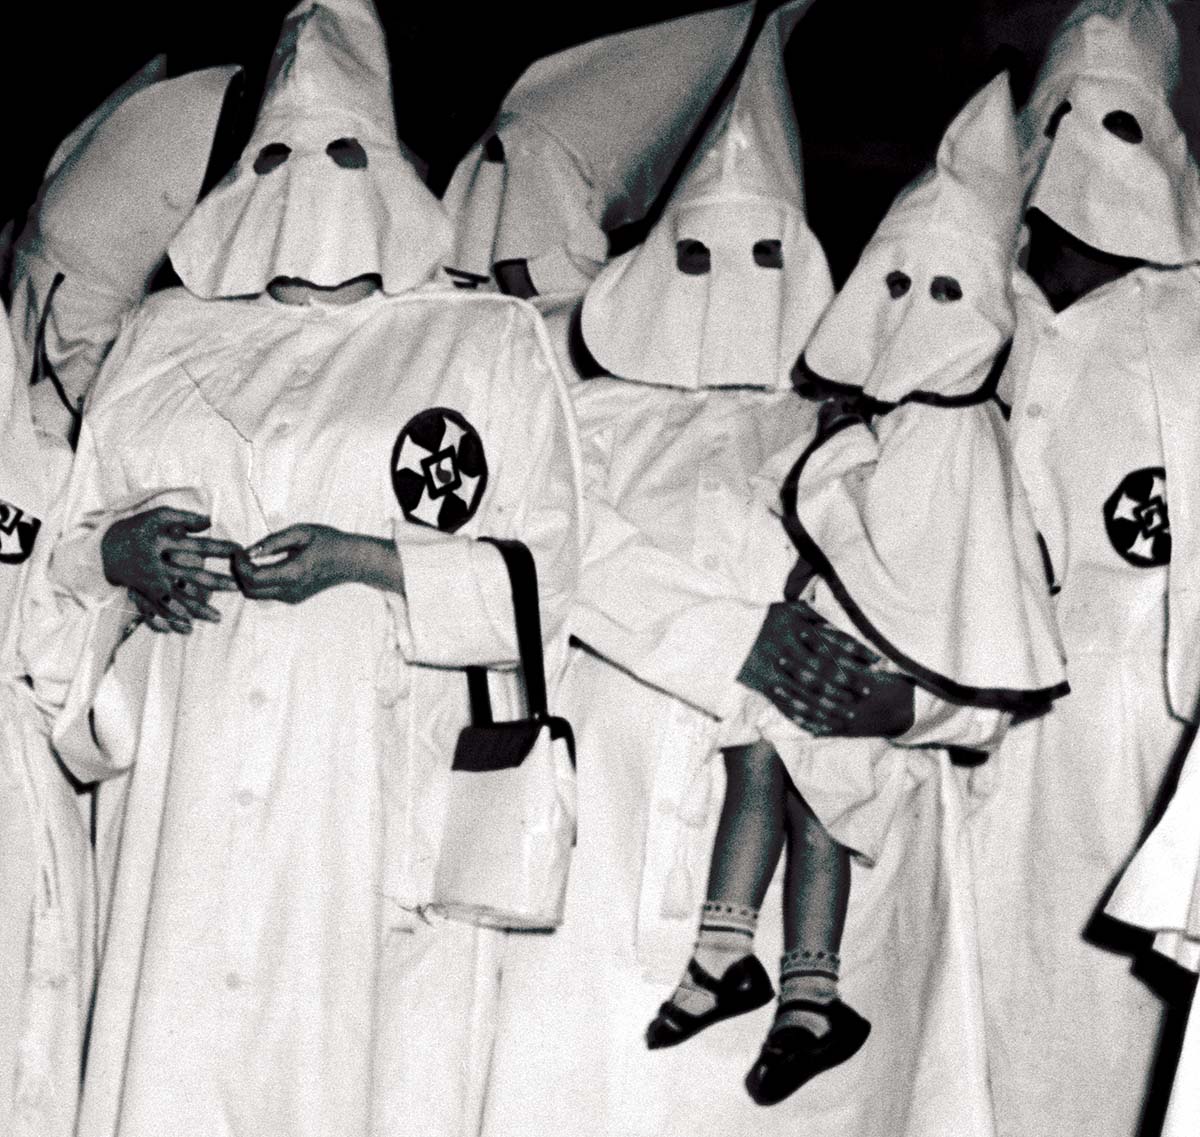 Women (and child) at a Ku Klux Klan mass-initiation ceremony, Atlanta, Georgia,  18 June 1949 © Getty Images